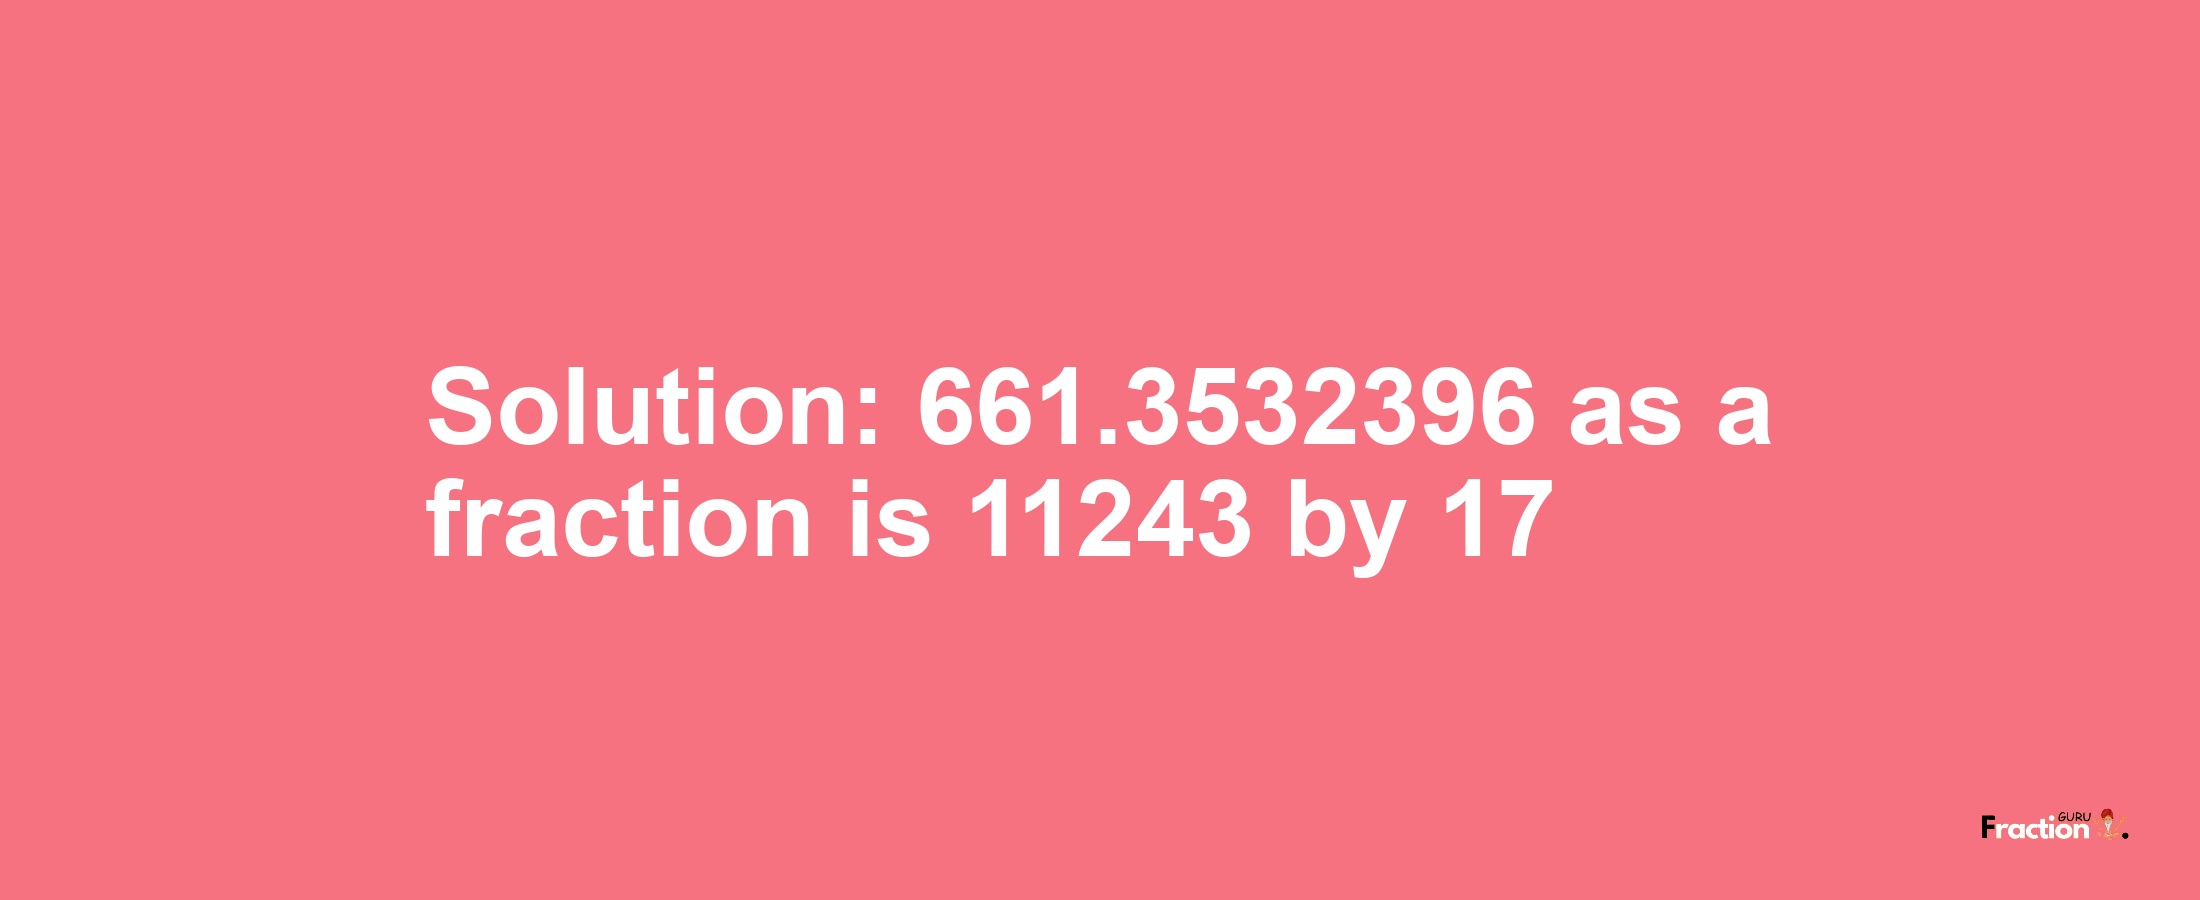 Solution:661.3532396 as a fraction is 11243/17